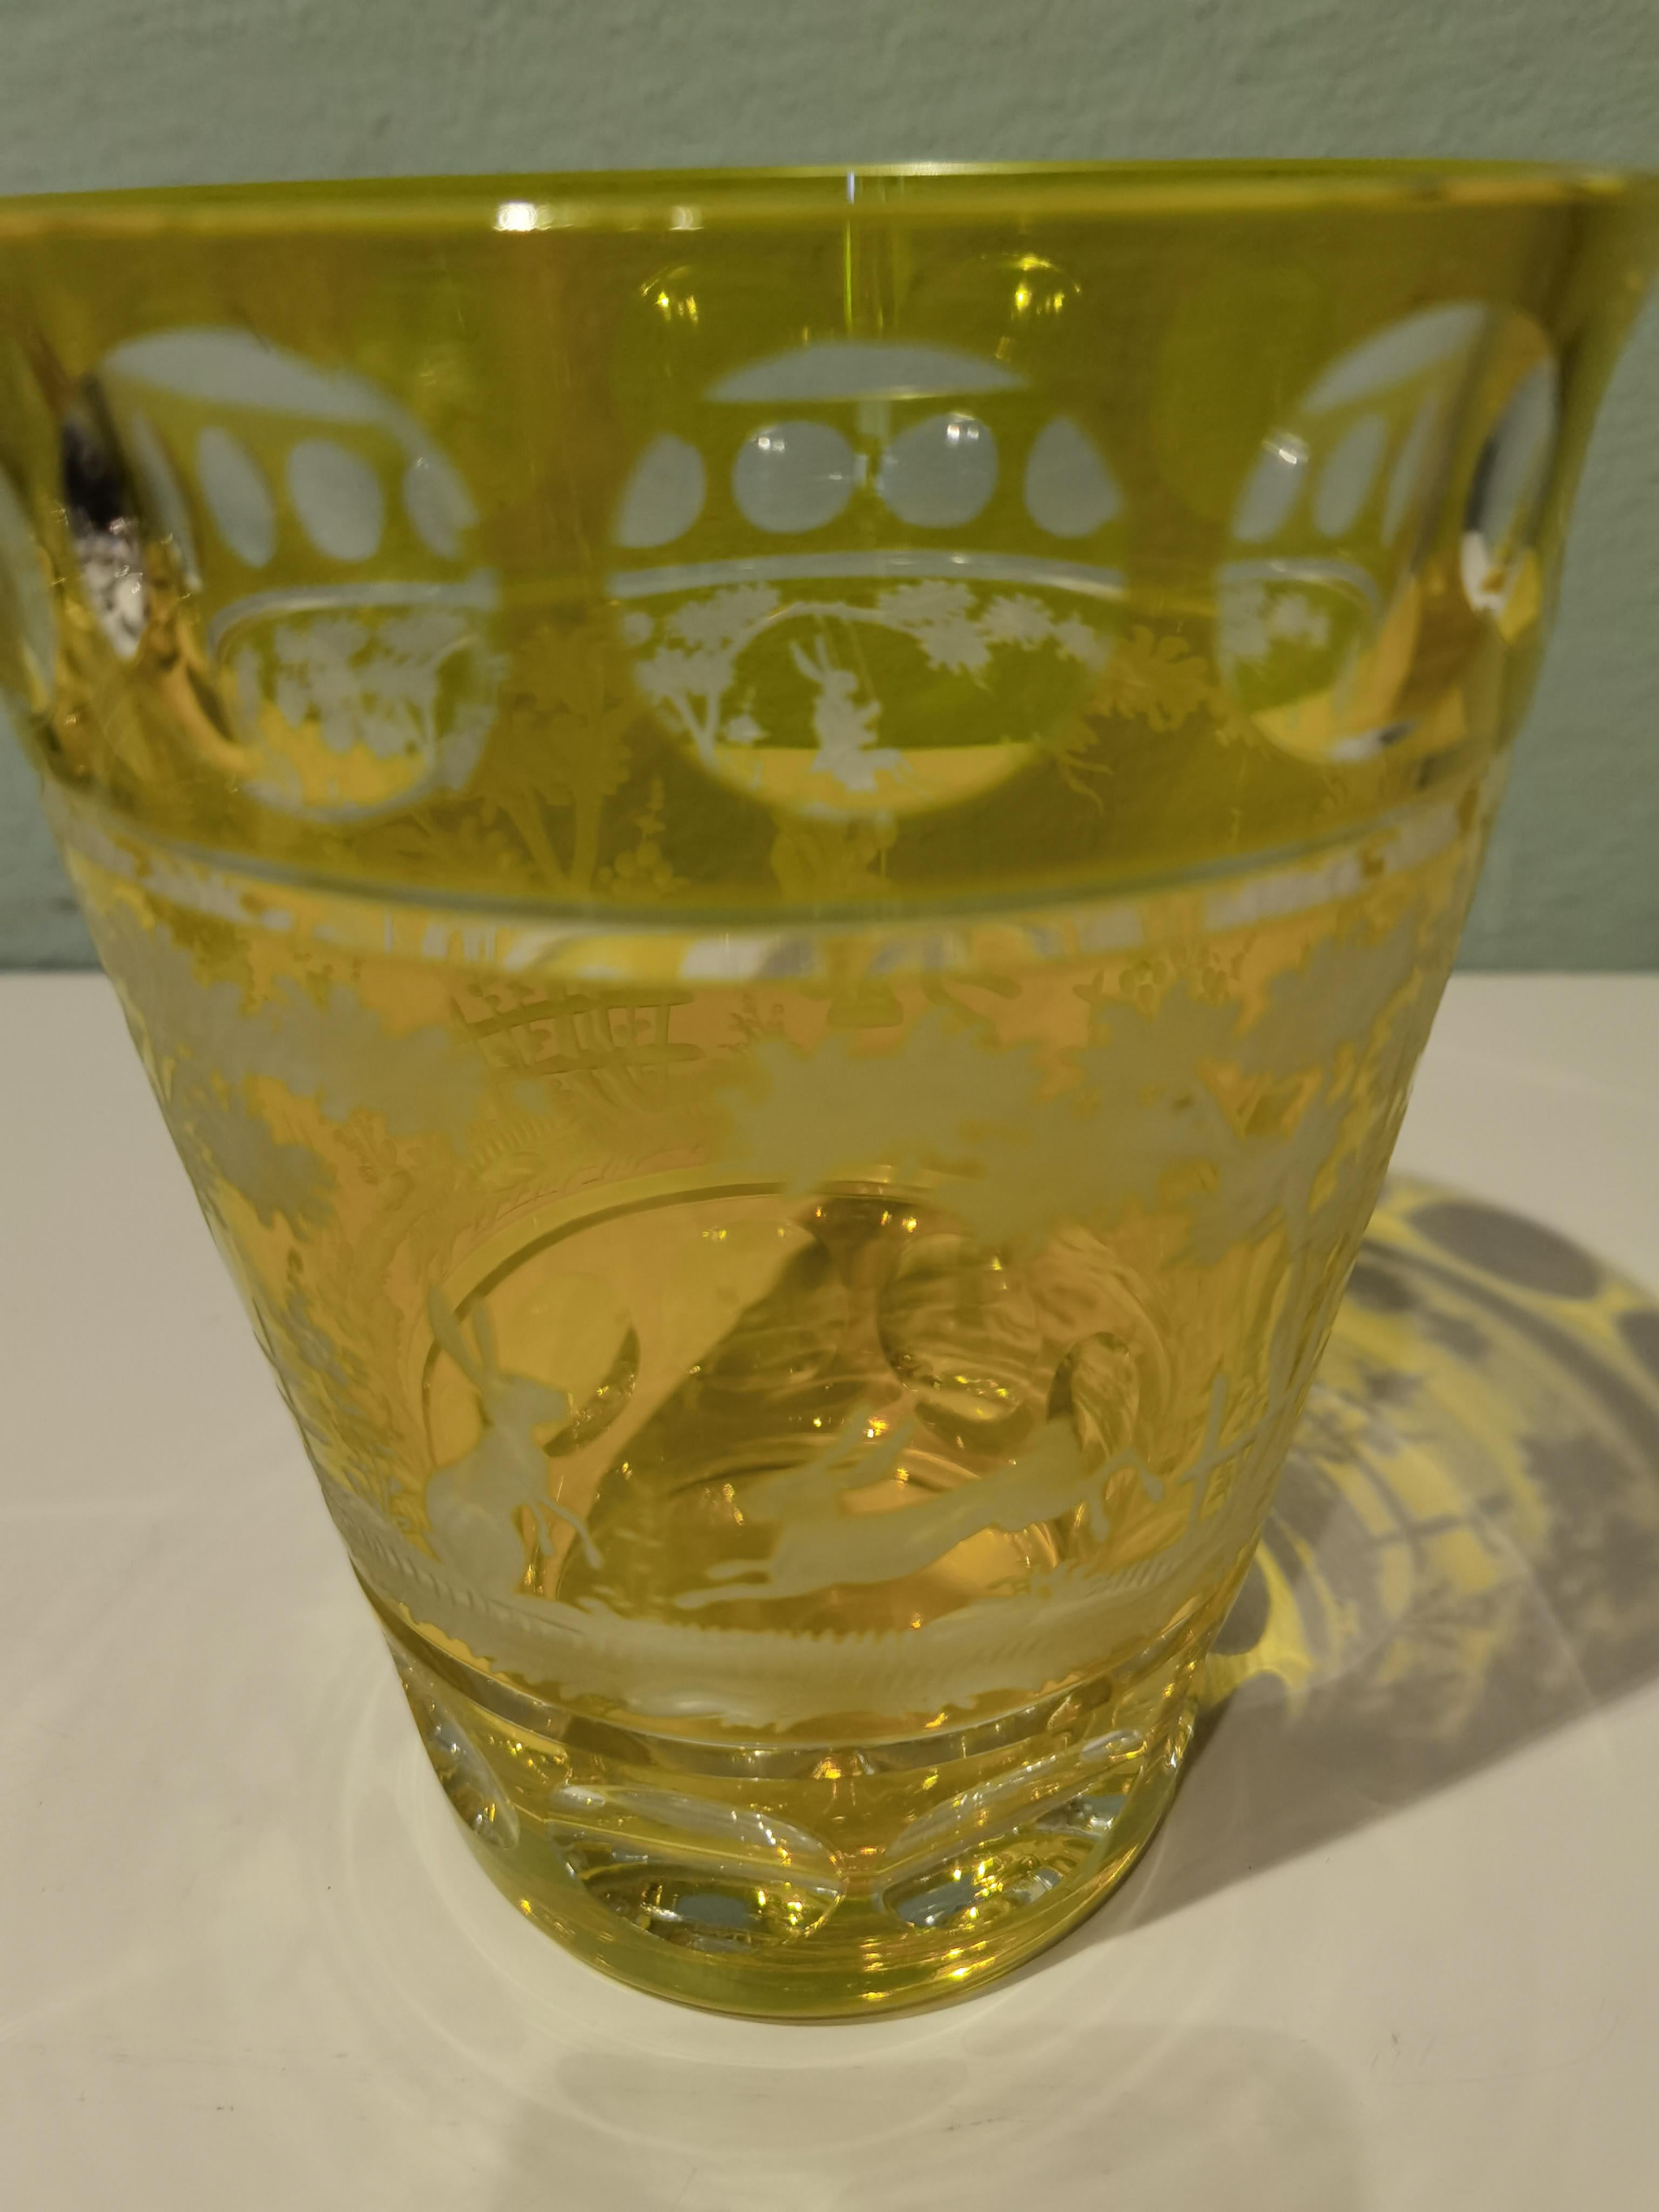 Hand blown crystal vase in yellow glass with a country style Easter decor all around. The leaves, bunny and deers are hand-engraved by glass artists in Bavaria/Germany. The glass here shown comes in ayellow color and can be ordered in different